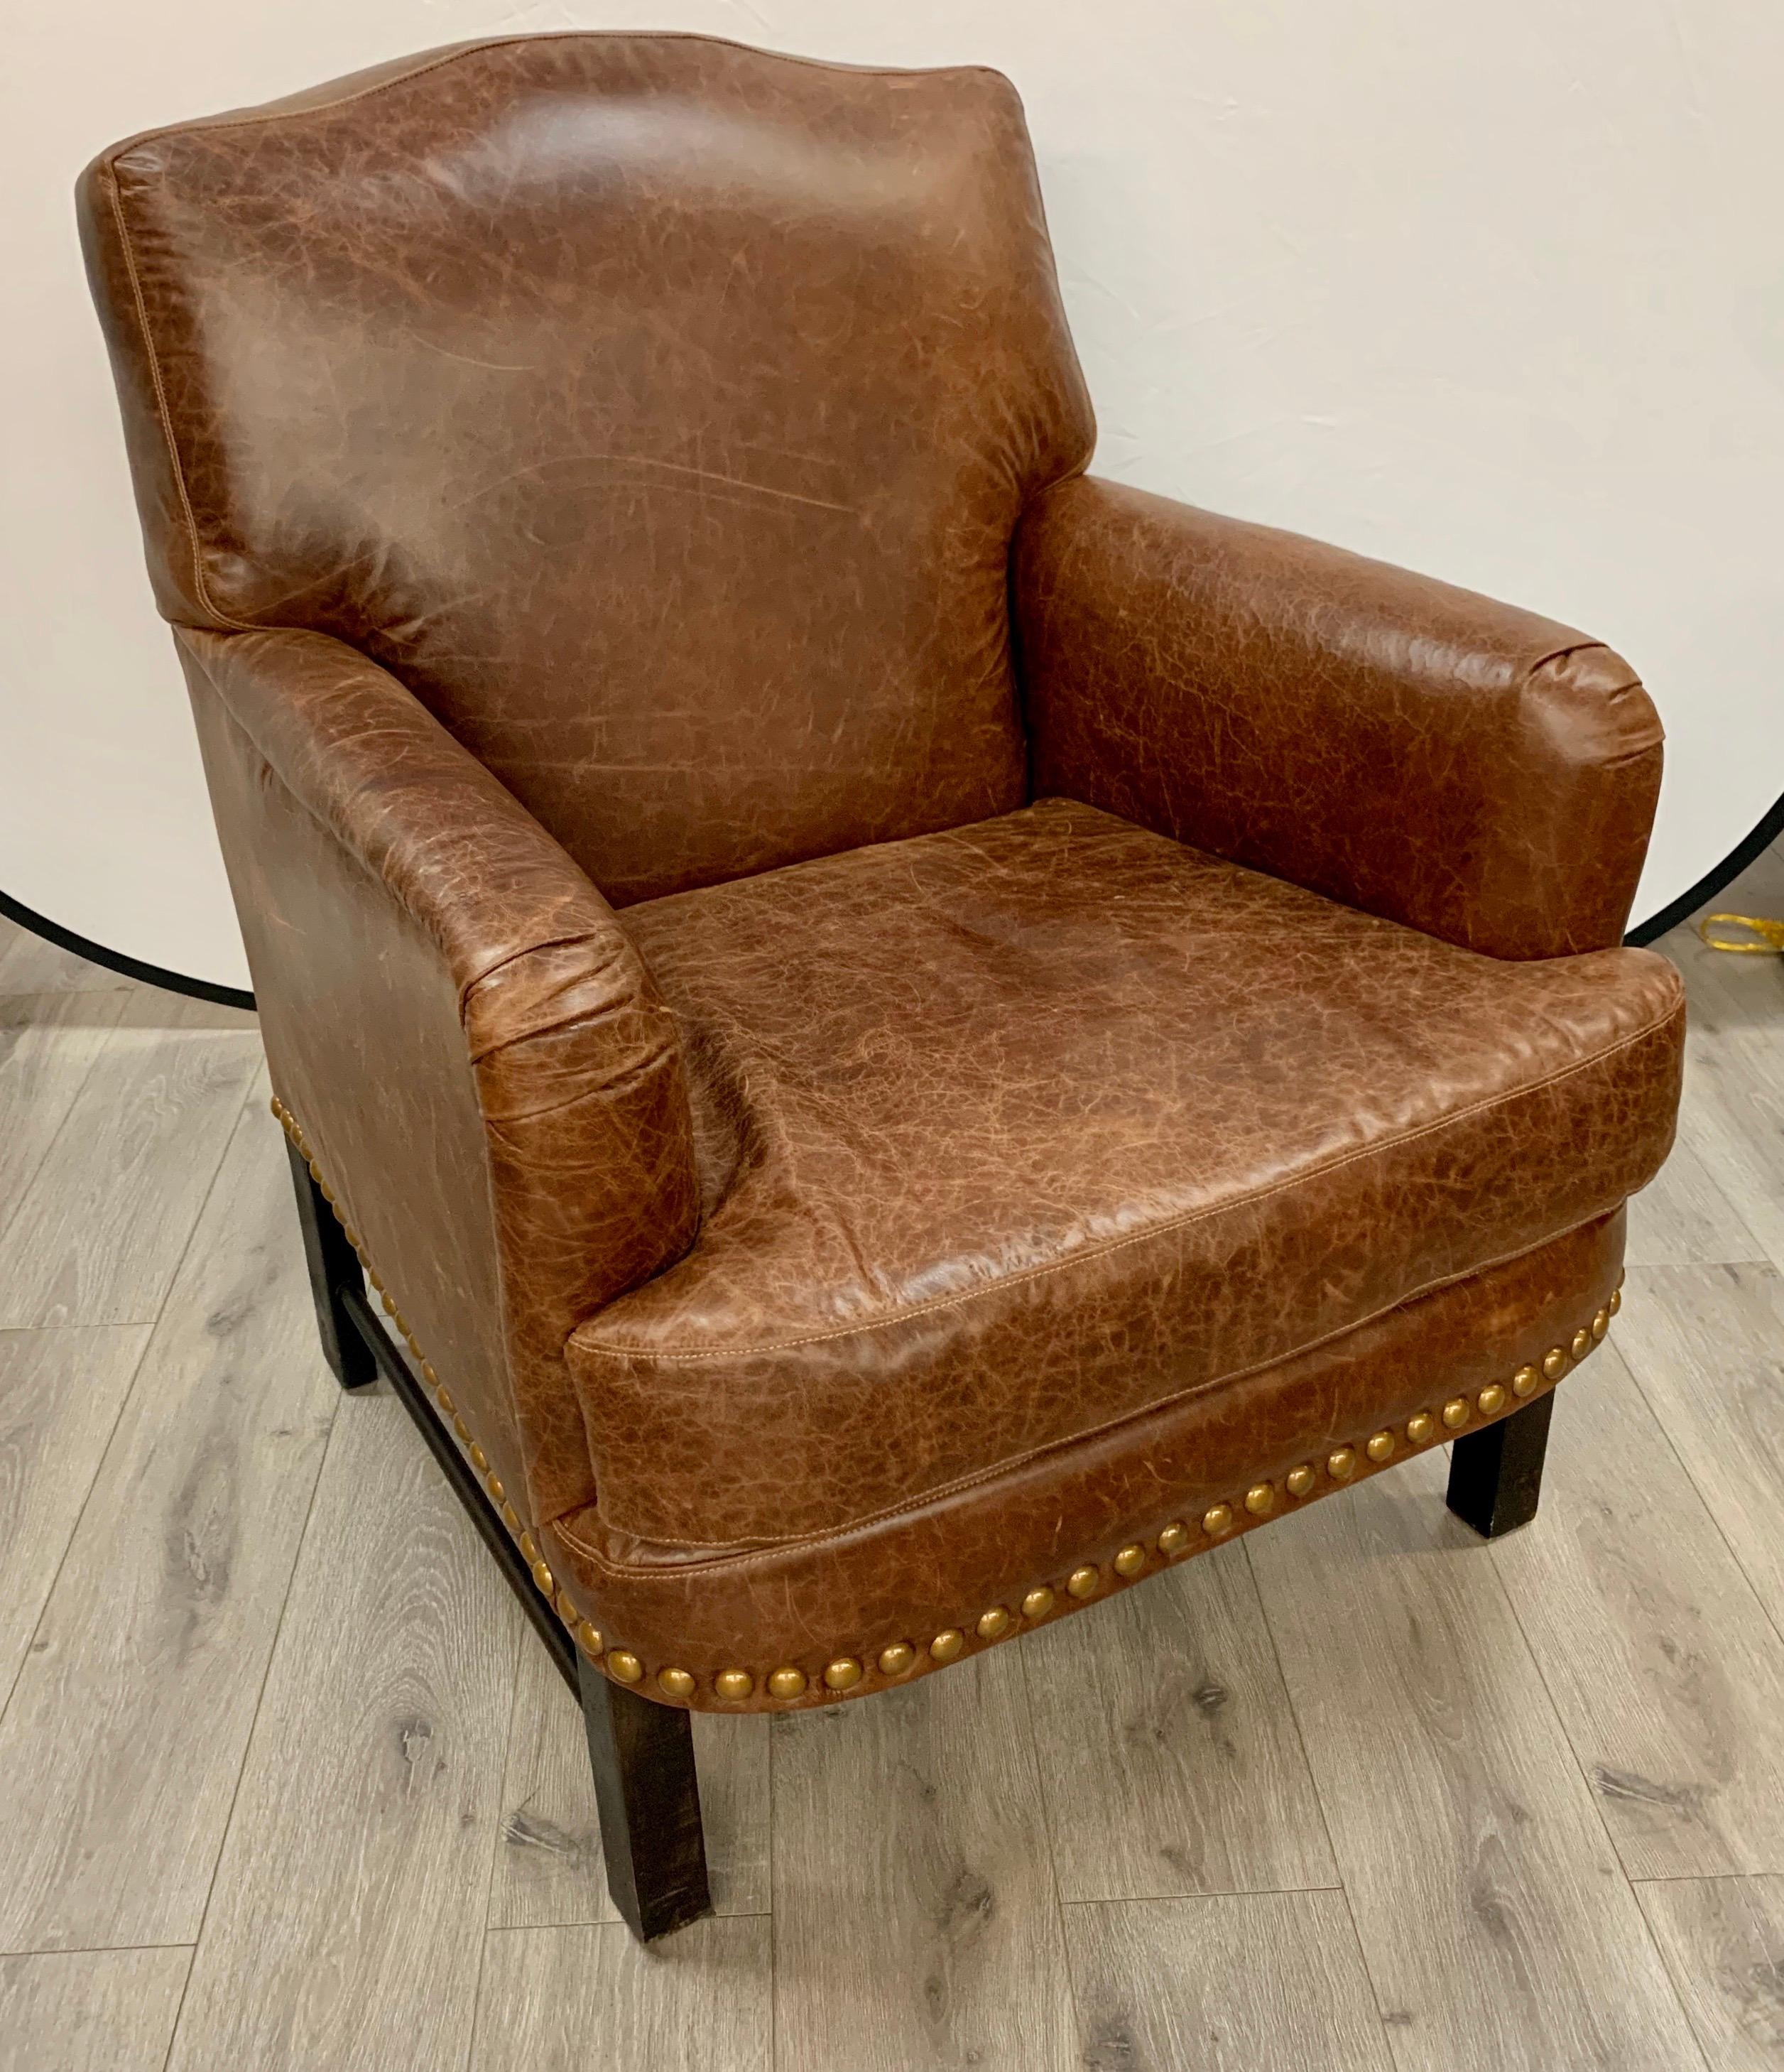 Soft brown leather club chair with nailheads. Now, more than ever, home is where the heart is.